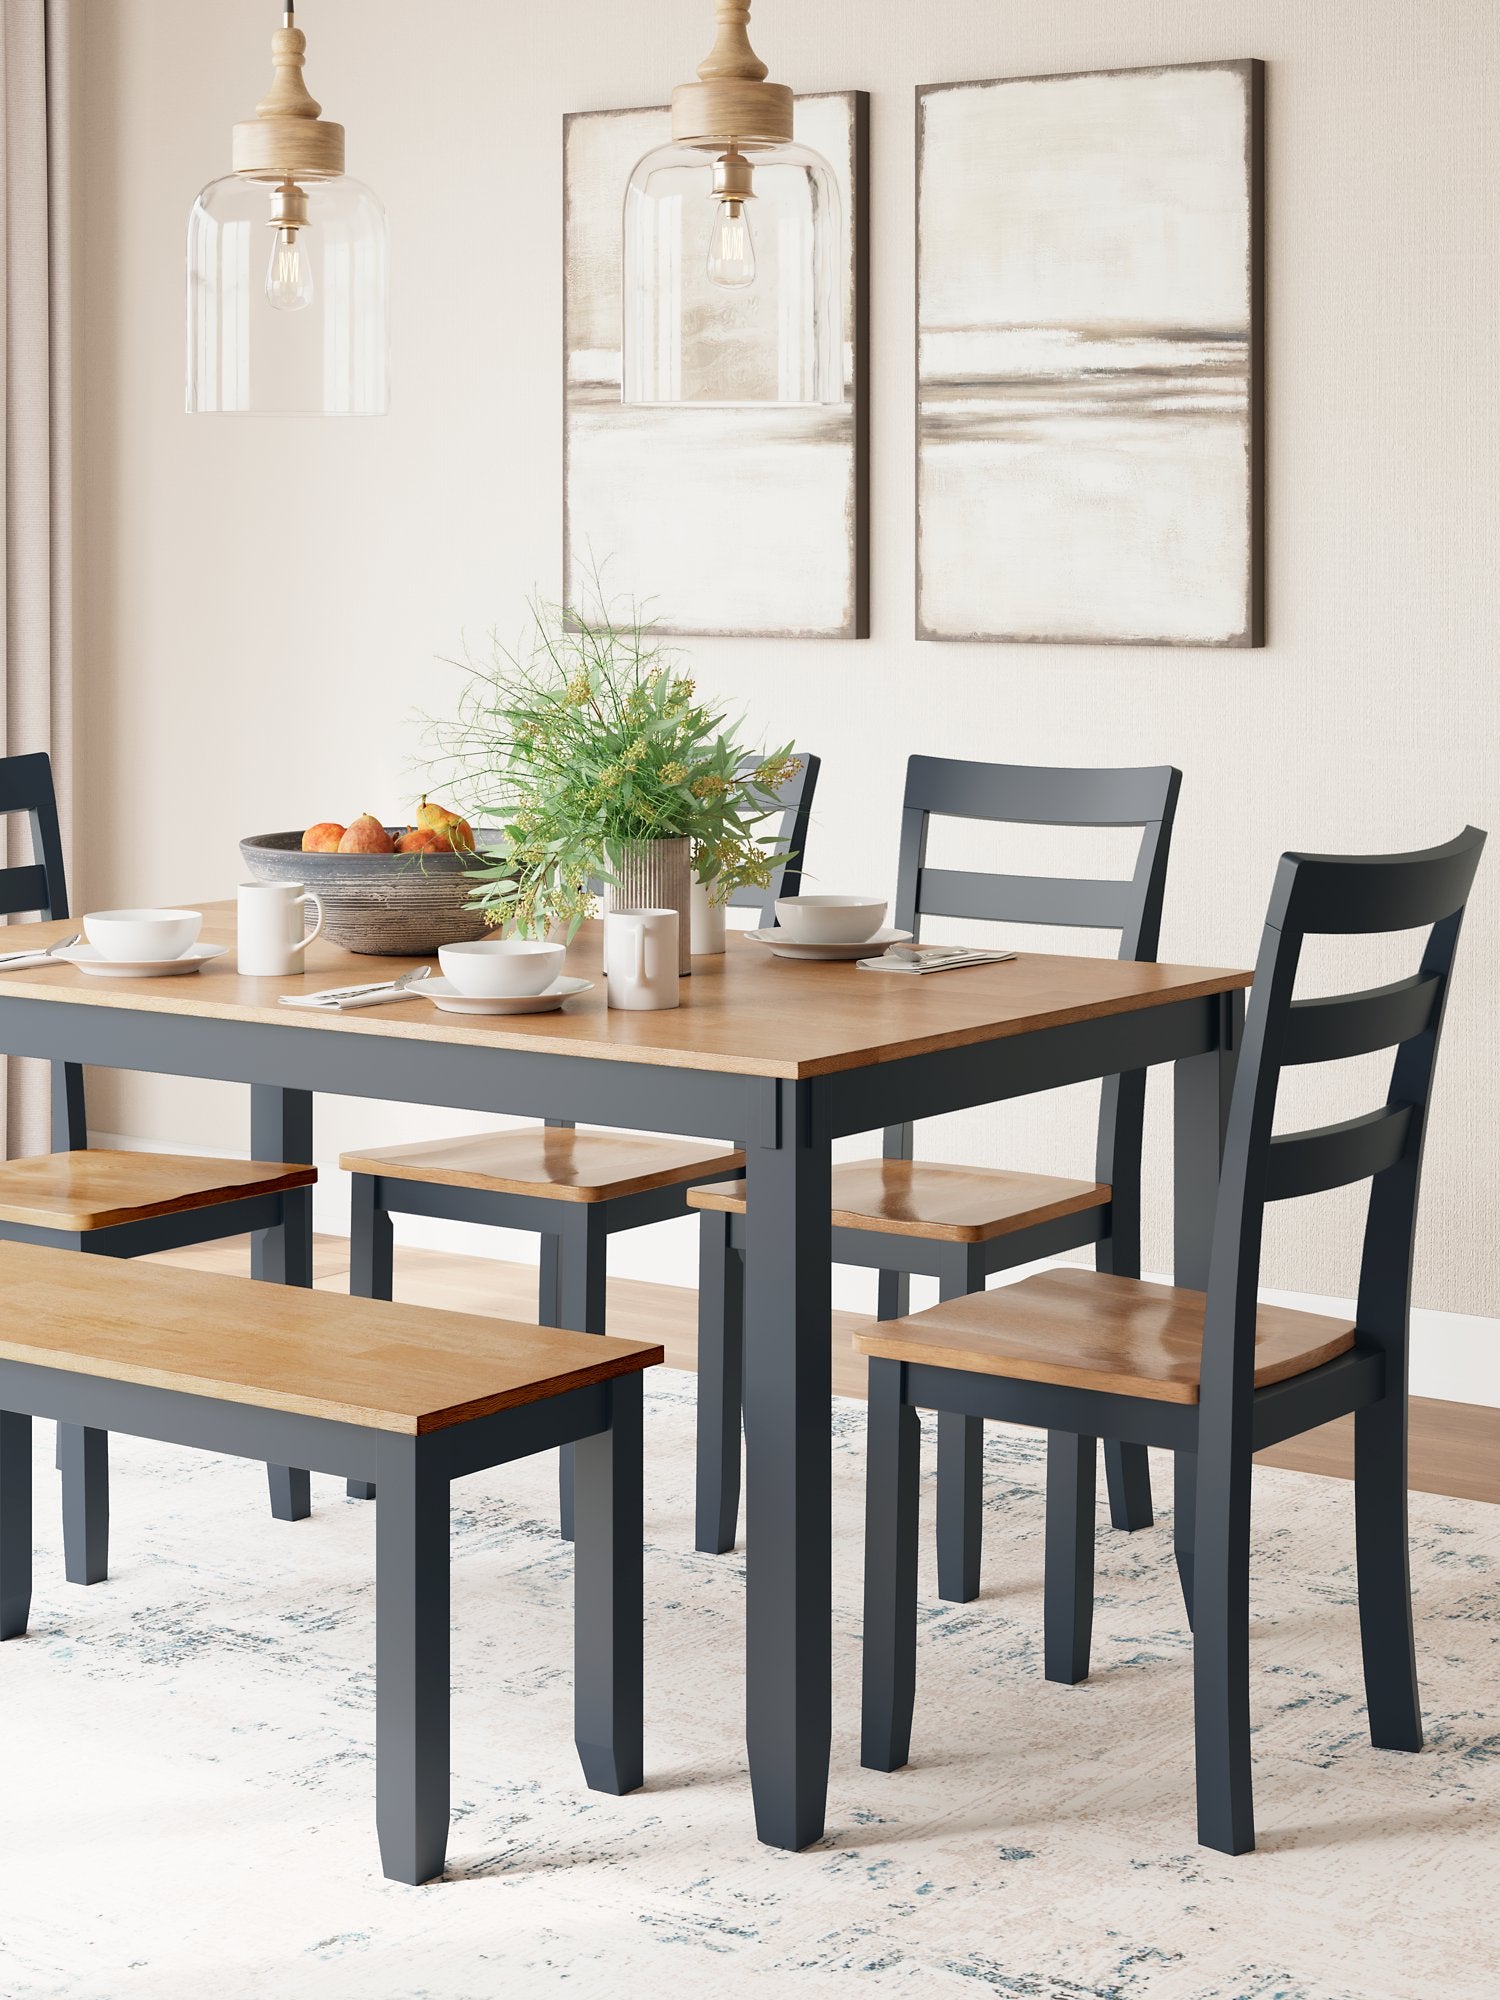 Gesthaven Dining Table with 4 Chairs and Bench (Set of 6) - Half Price Furniture